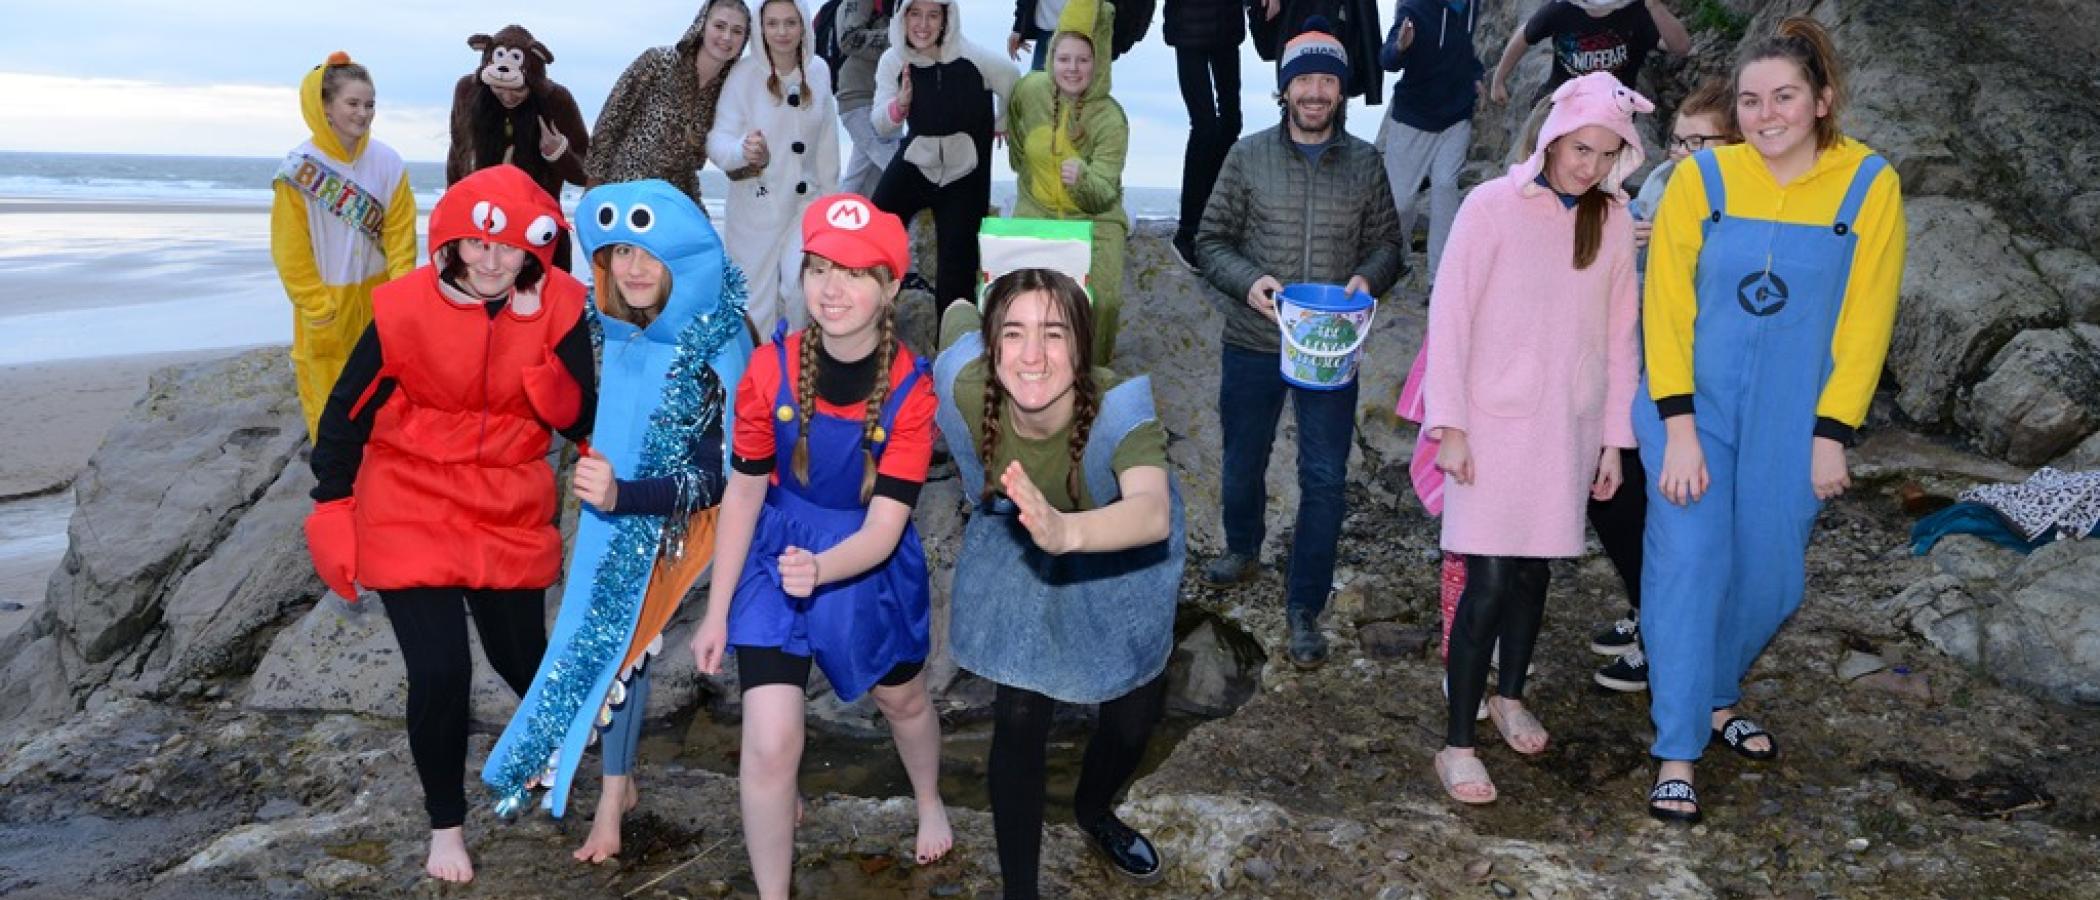 A splash in the sea for charity - students take a walrus dip